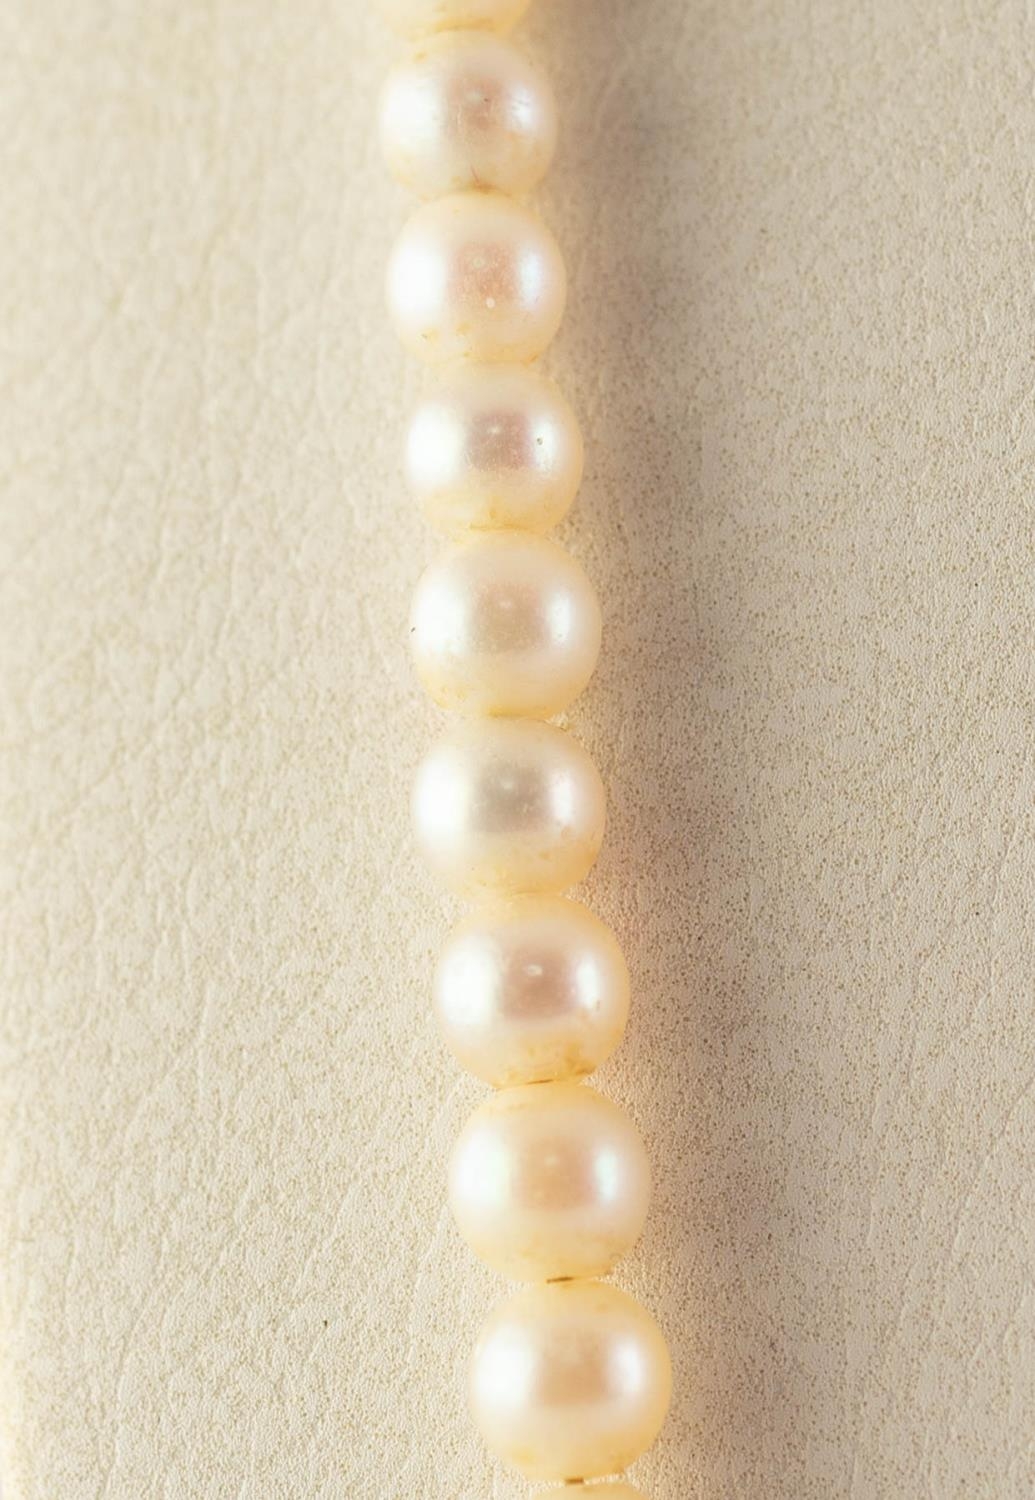 SINGLE STRAND NECKLACE OF GRADUATED CULTURED PEARLS with sterling silver, marcasite and seed pearl - Image 2 of 4